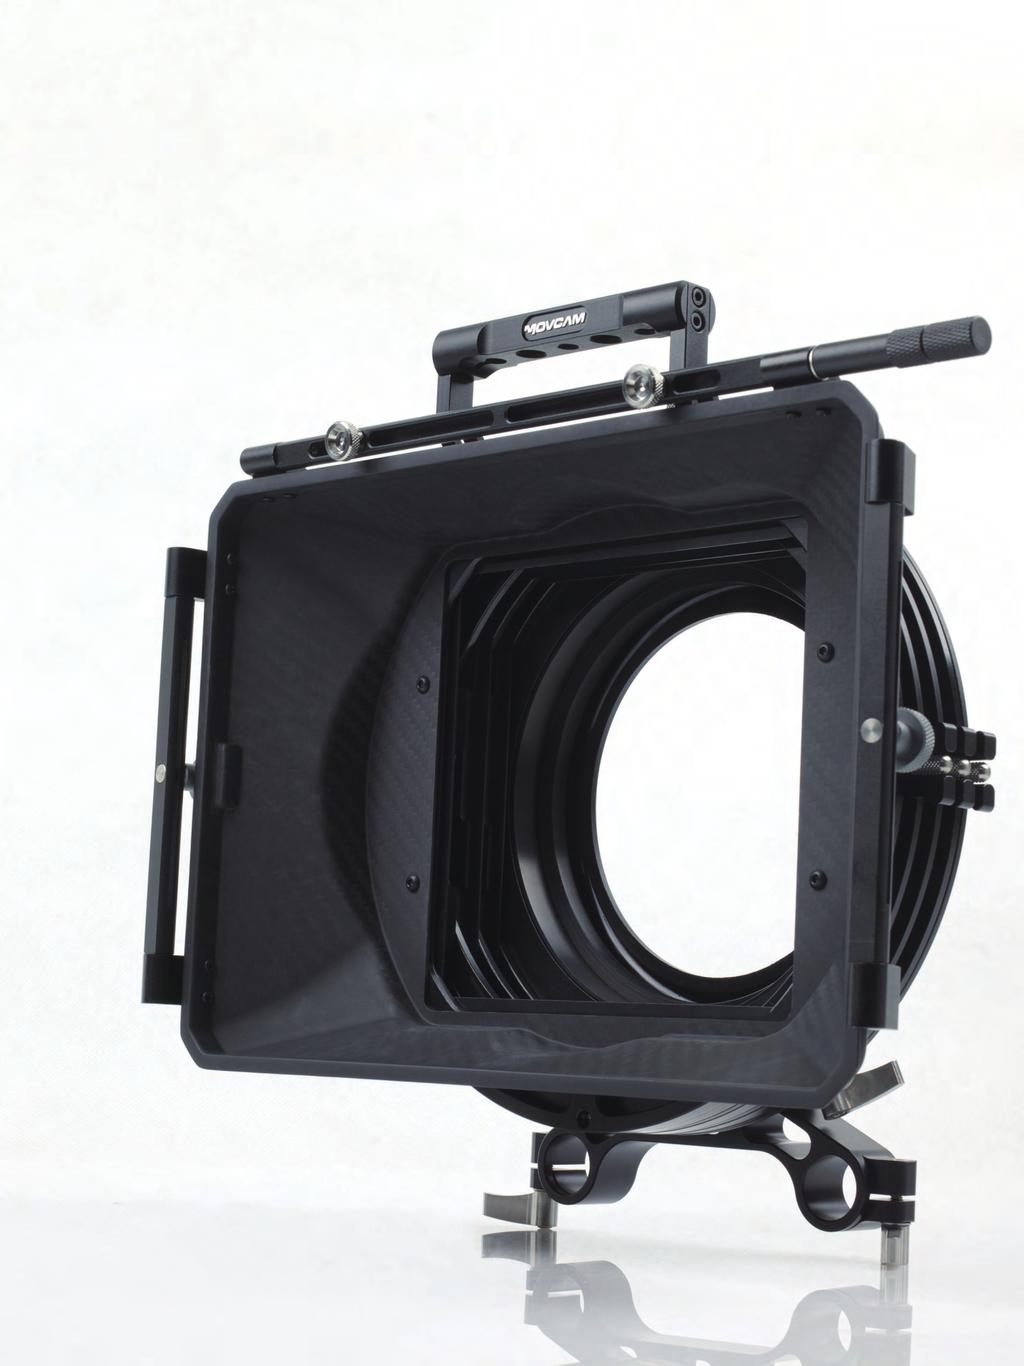 MatteBox MatteBox MM-5 MatteBox #301-0501 Connecting diameter 144mm Filter stage 3 (2 of them rotatable) extra optional filter stage available Standard filter frame 5.65x5.